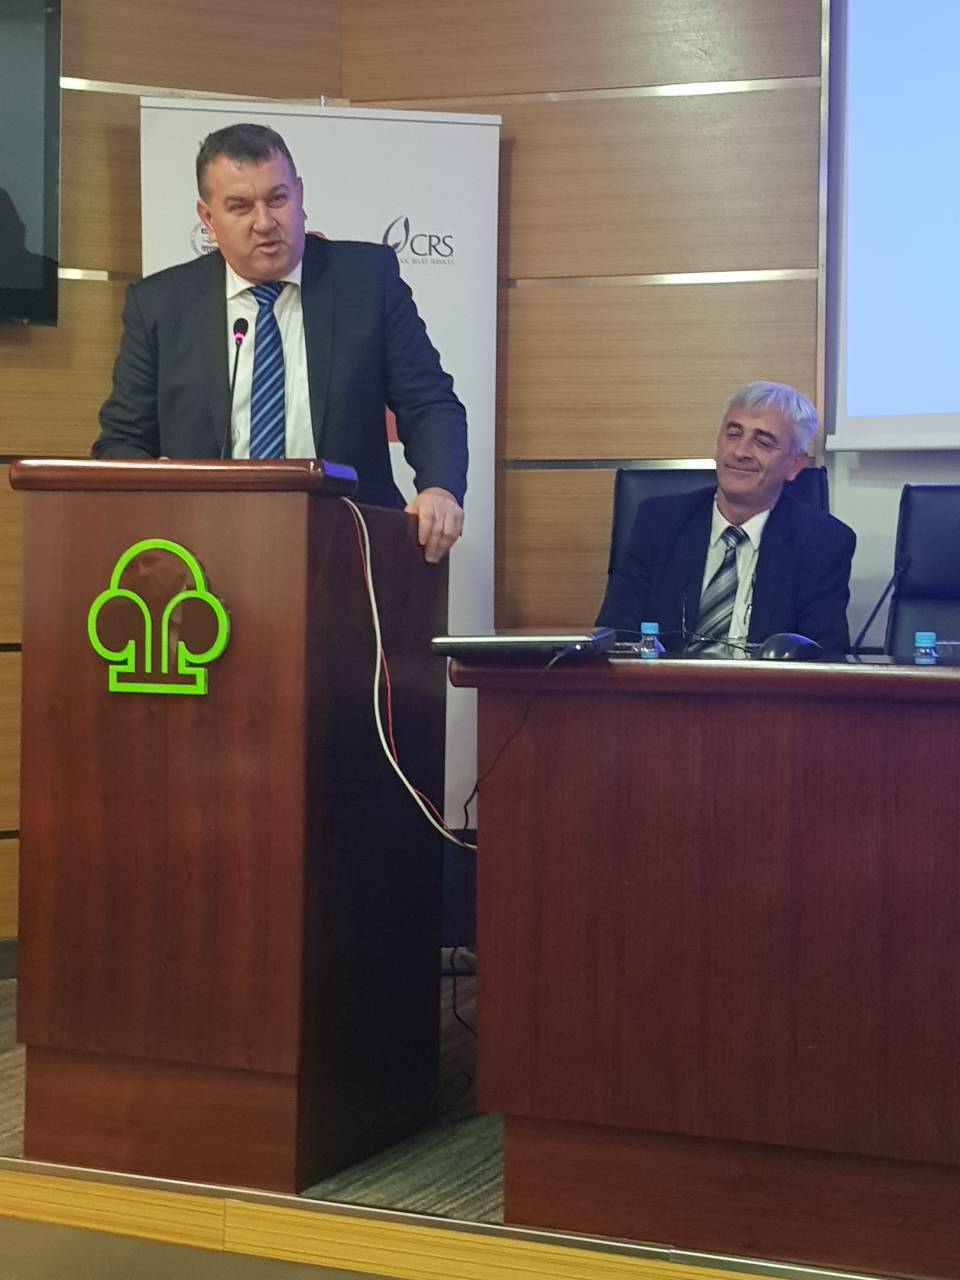 Conference on promotion of new business friendly municipalities in Bosnia and Herzegovina